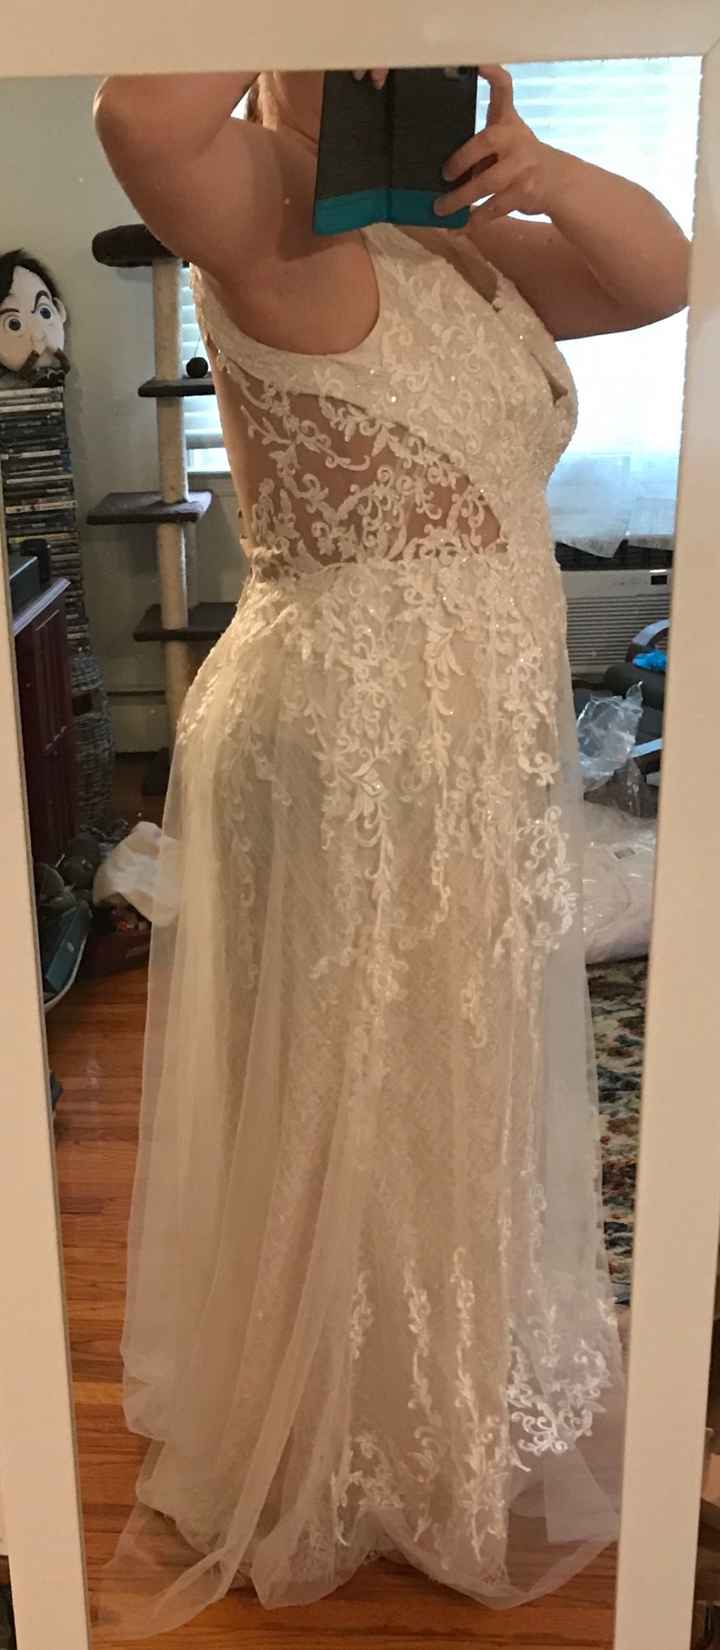 Is it possible to alter this dress? - 1